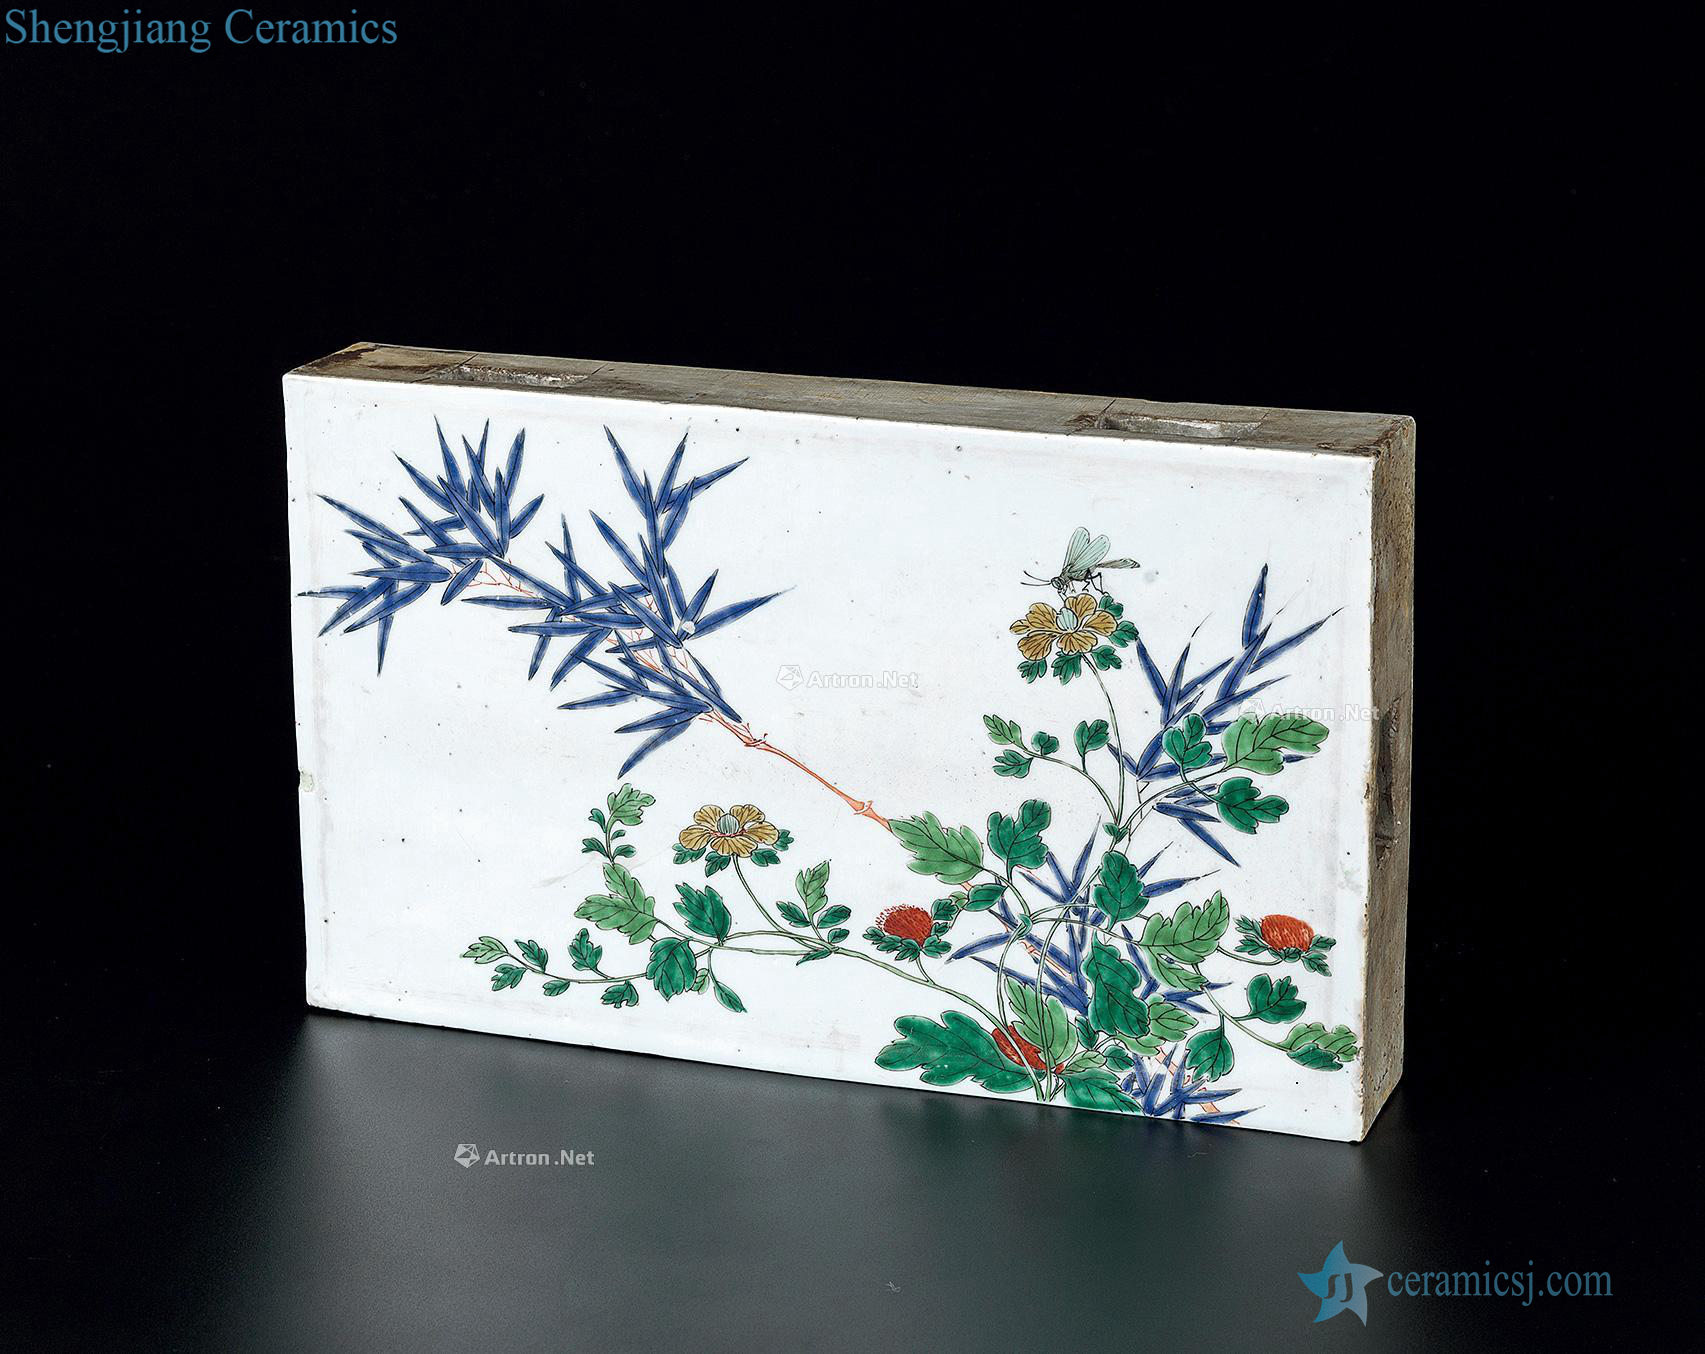 The qing emperor kangxi colorful flowers and pea green glaze dark carved flower grain ceramic tile